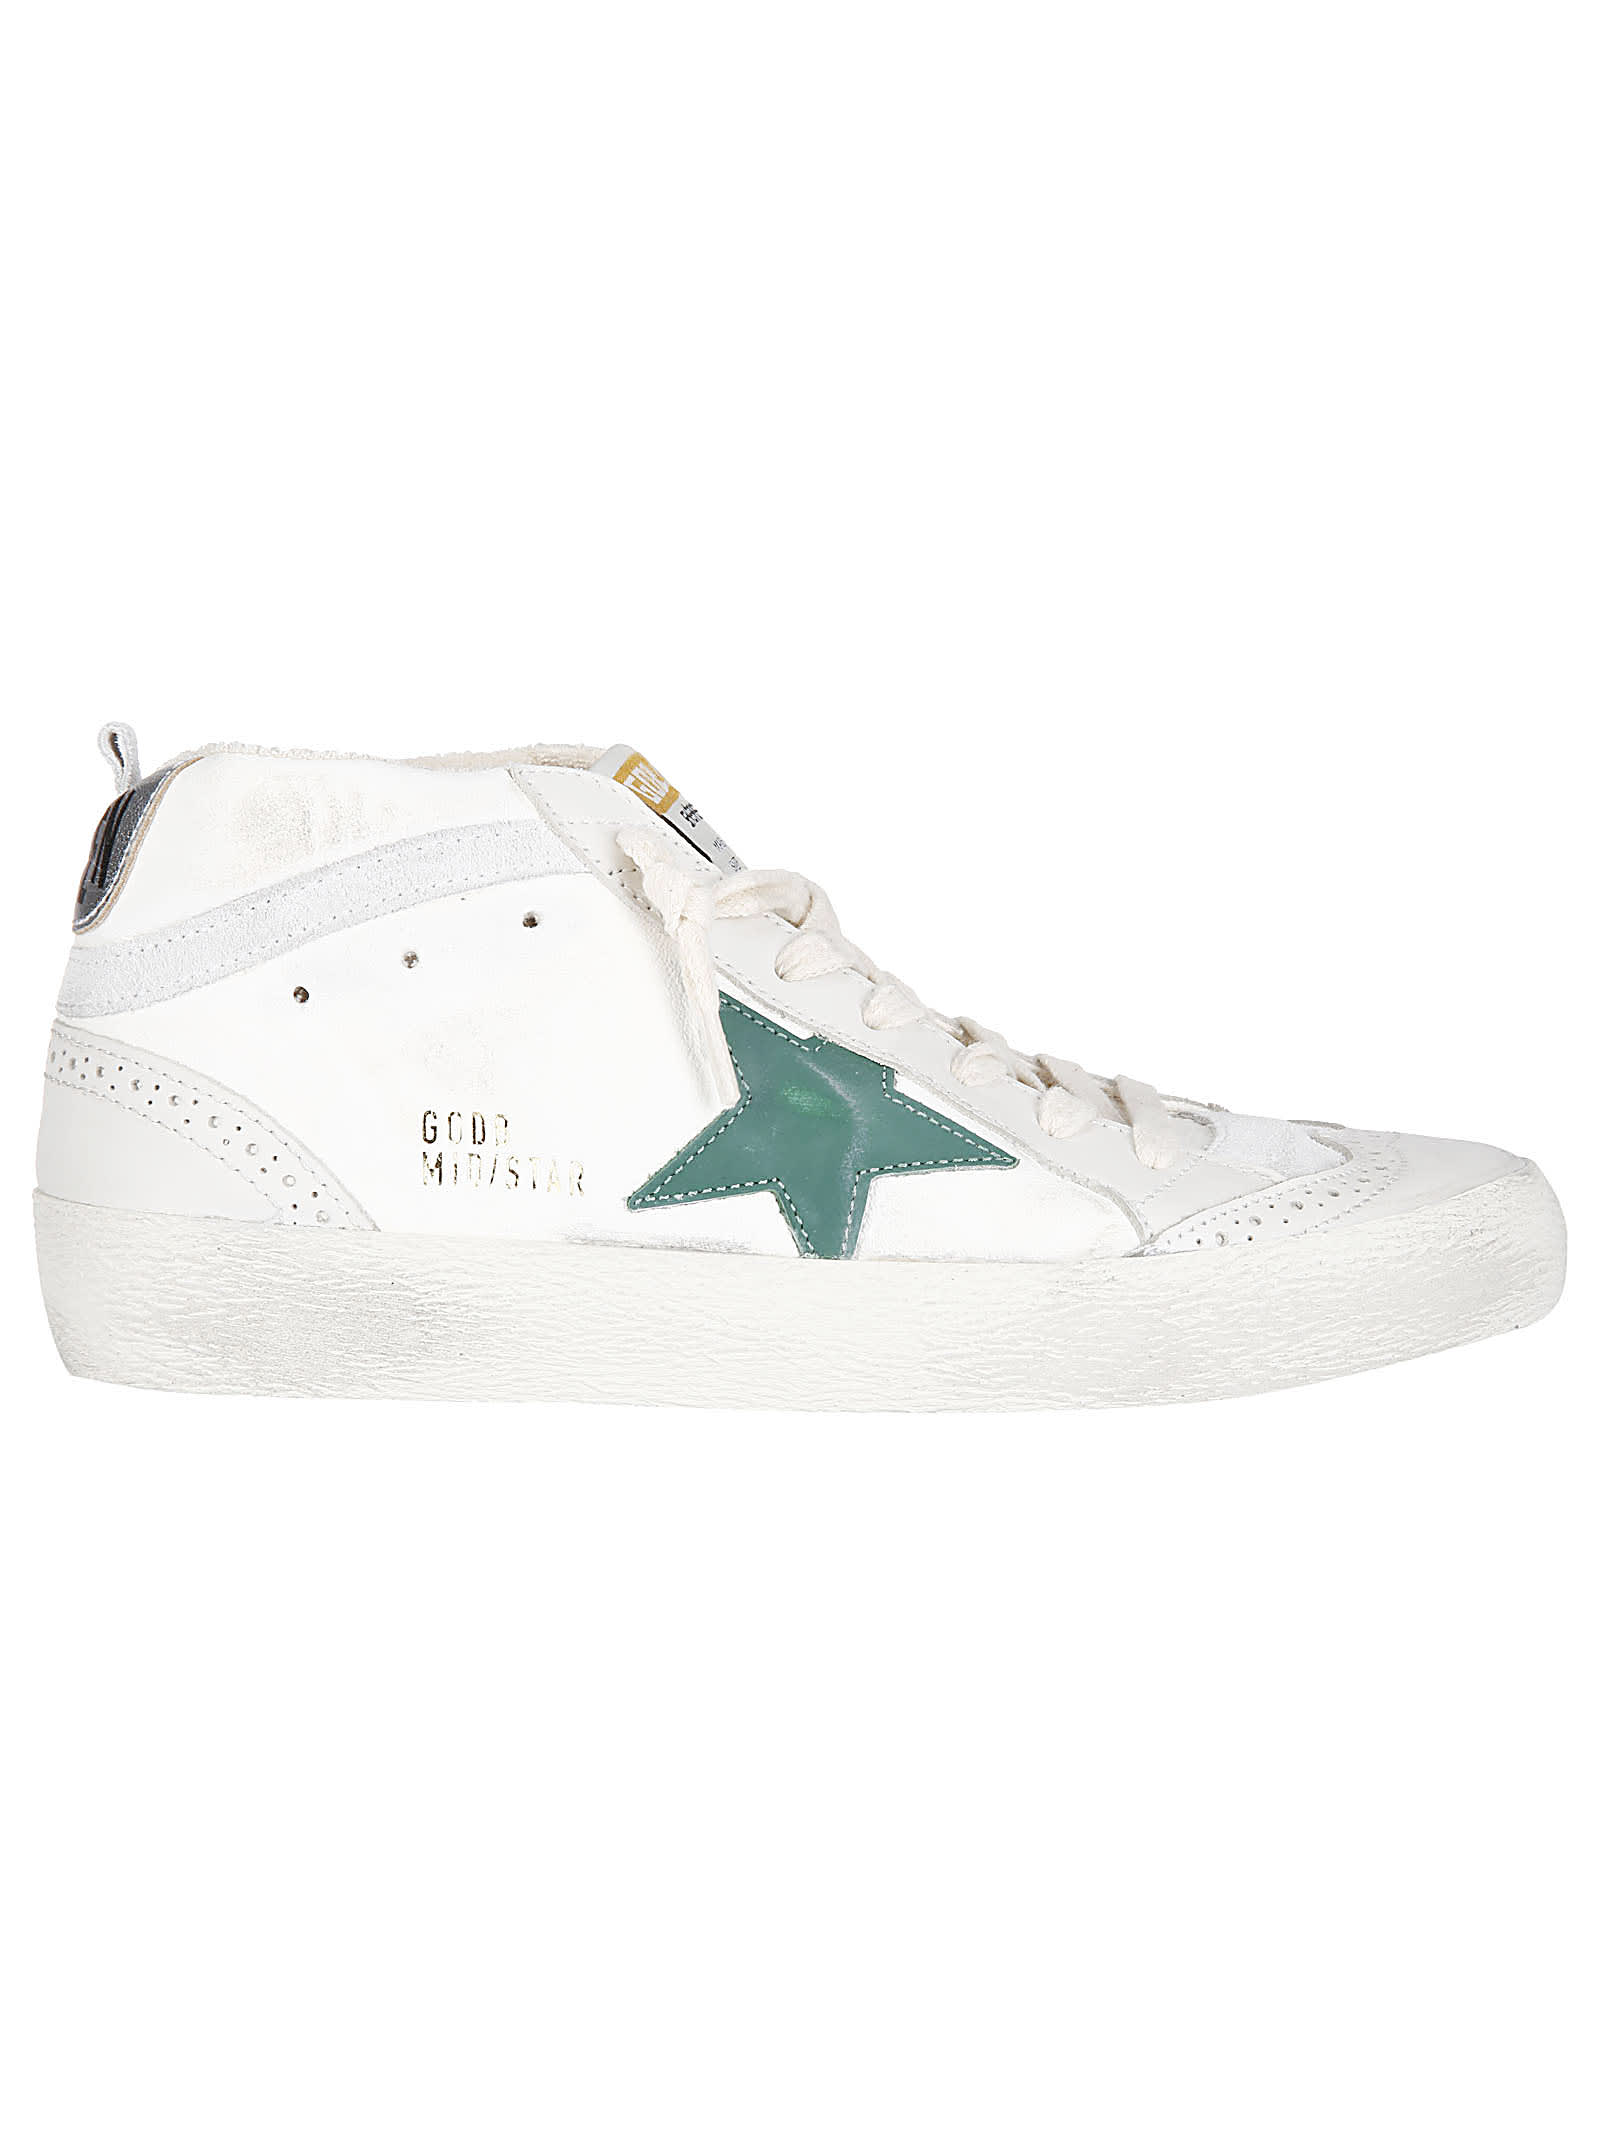 Golden Goose Mid Star Nappa Upper Leather Toe